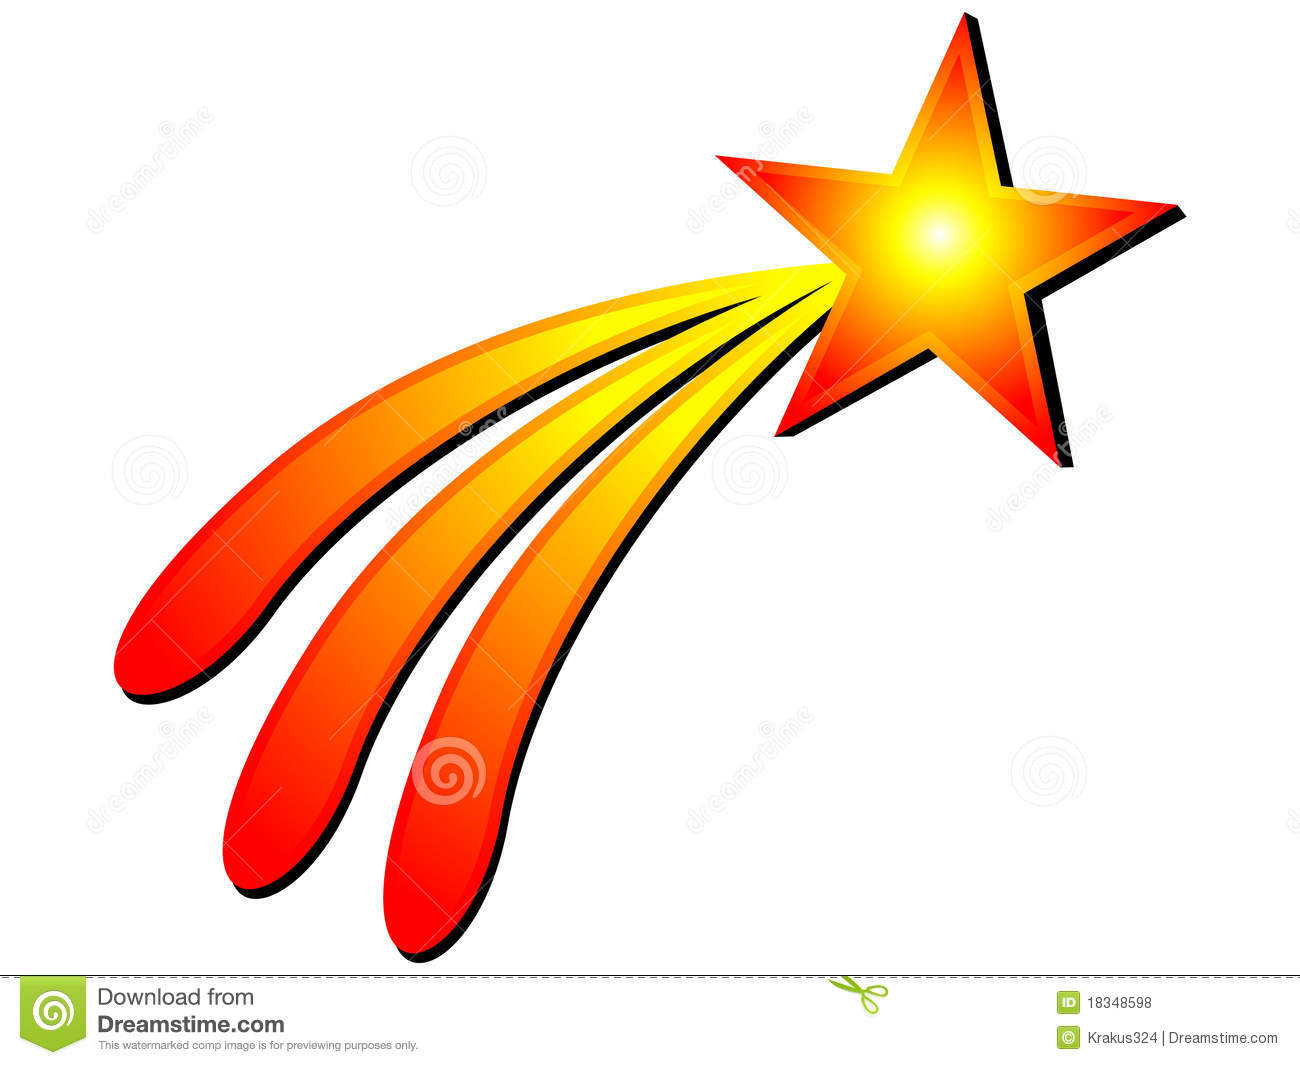 Shooting star clipart images 